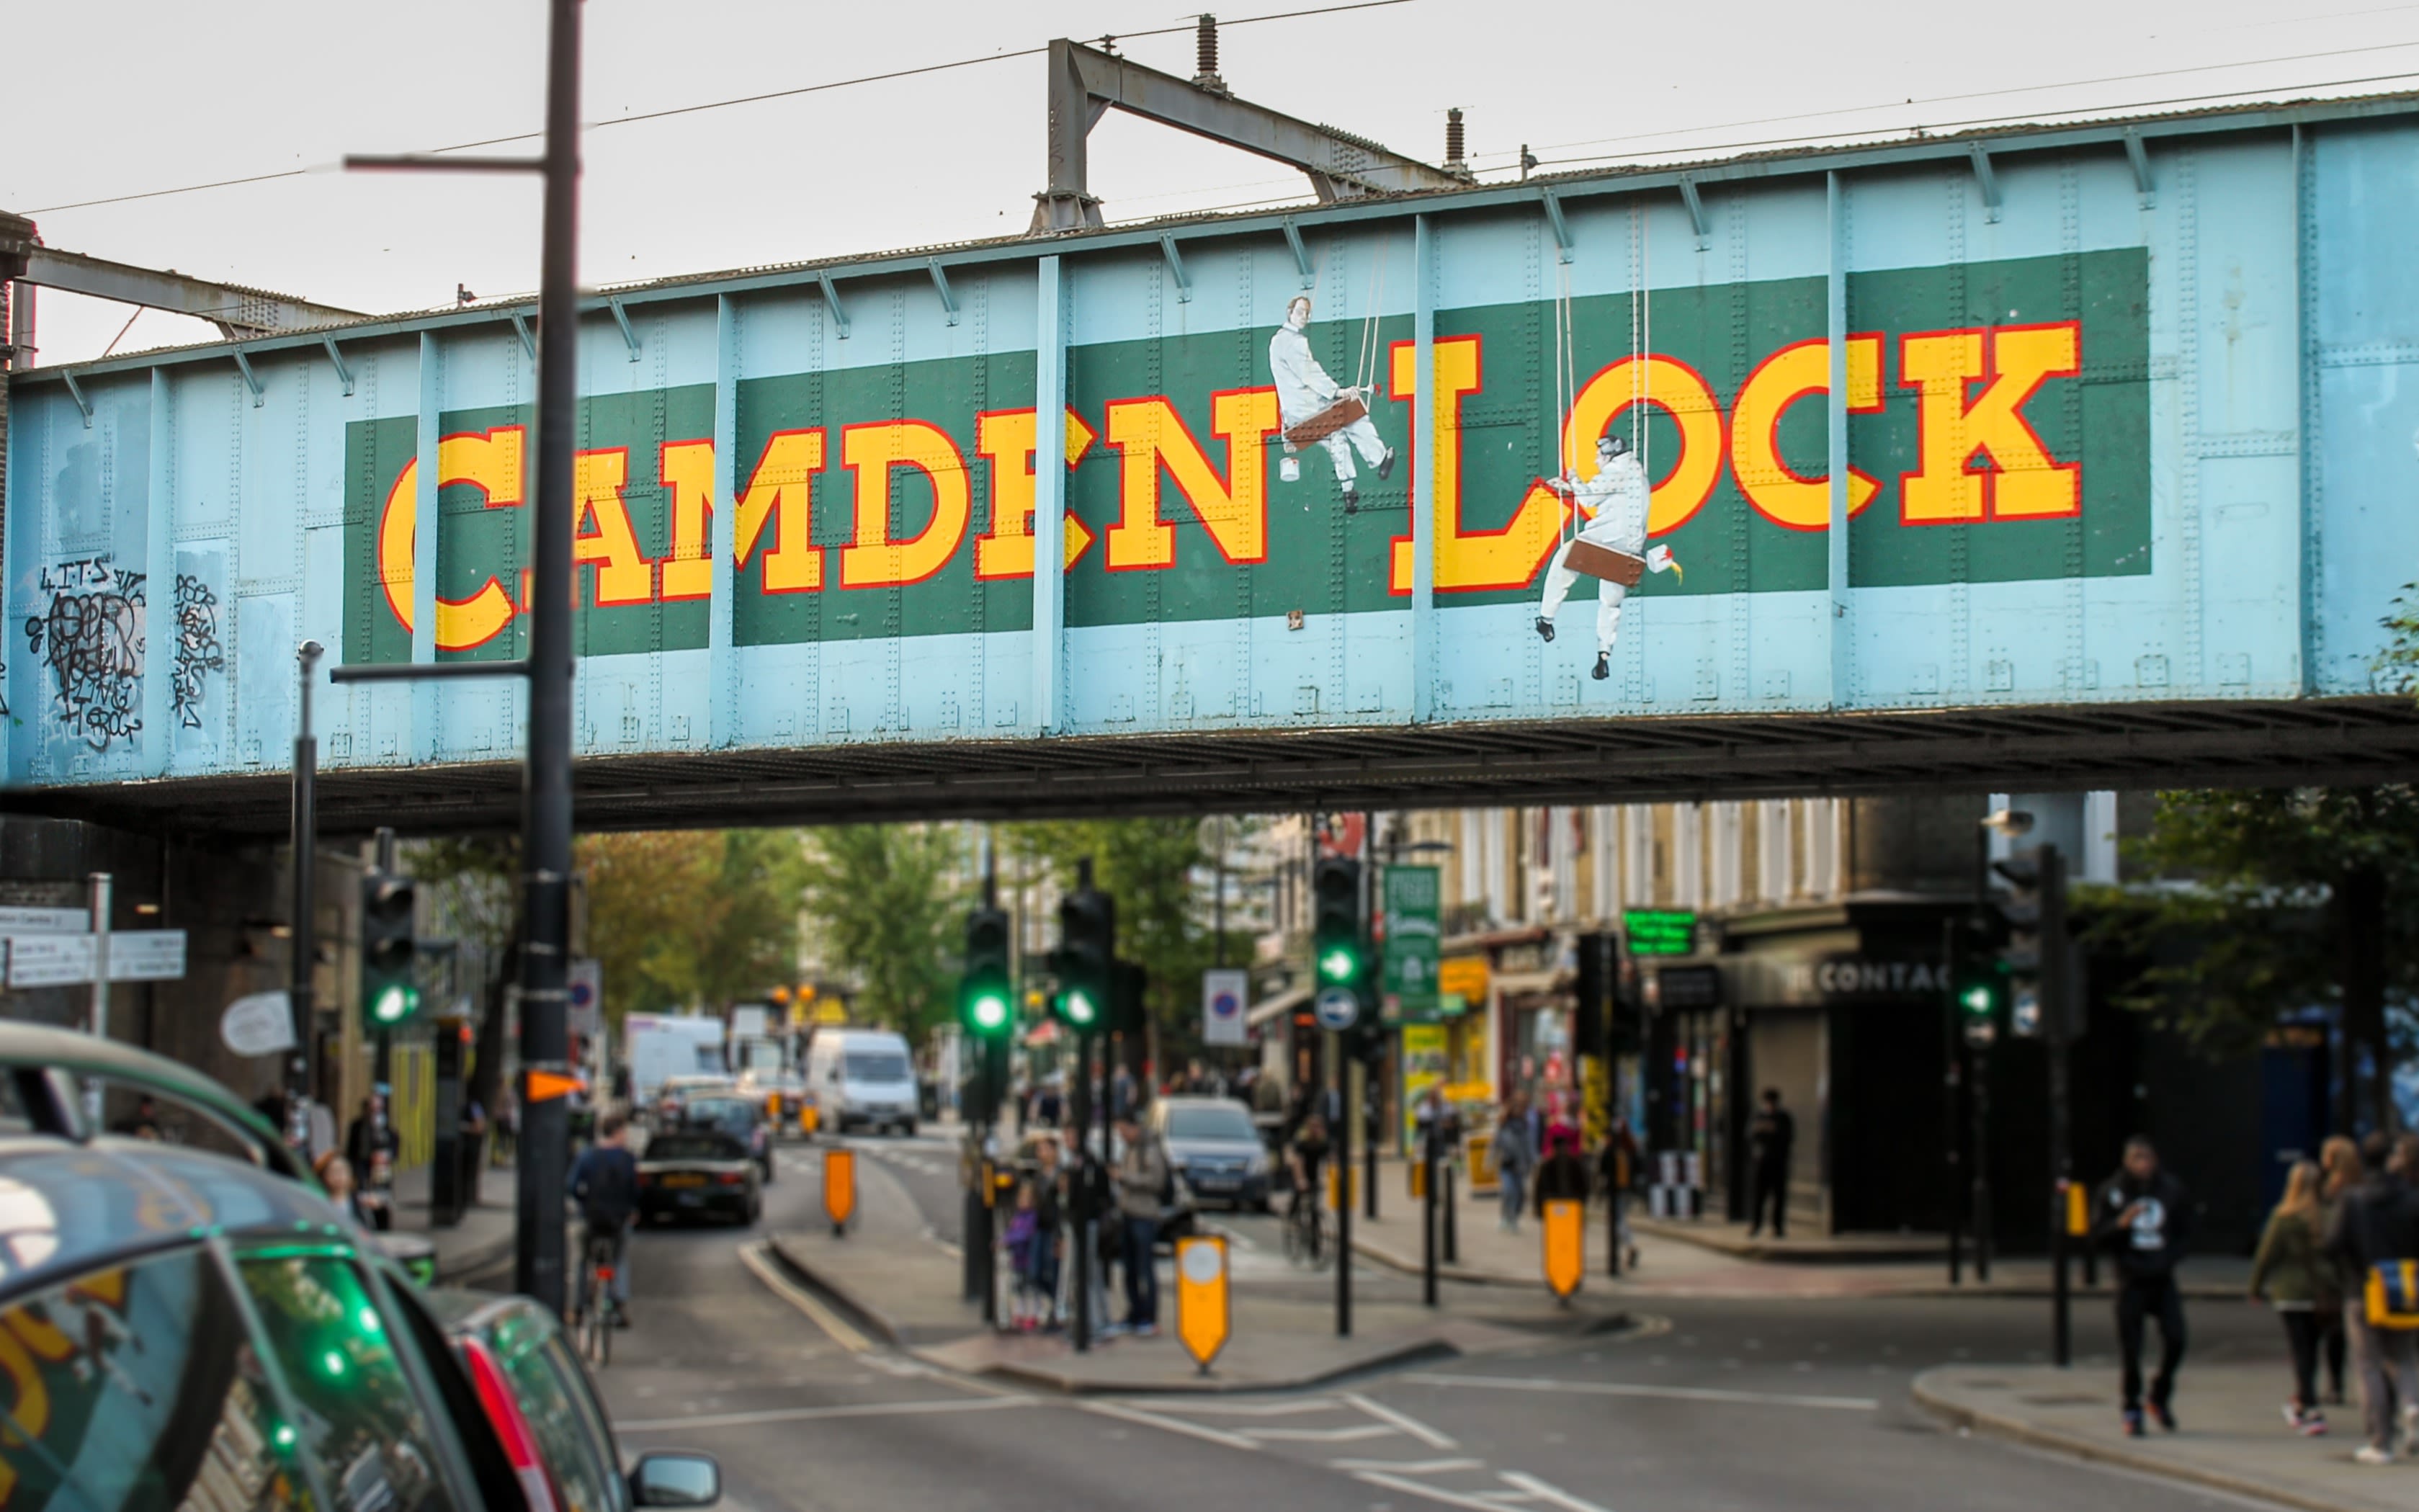 An image of the famous Camden Market street sign